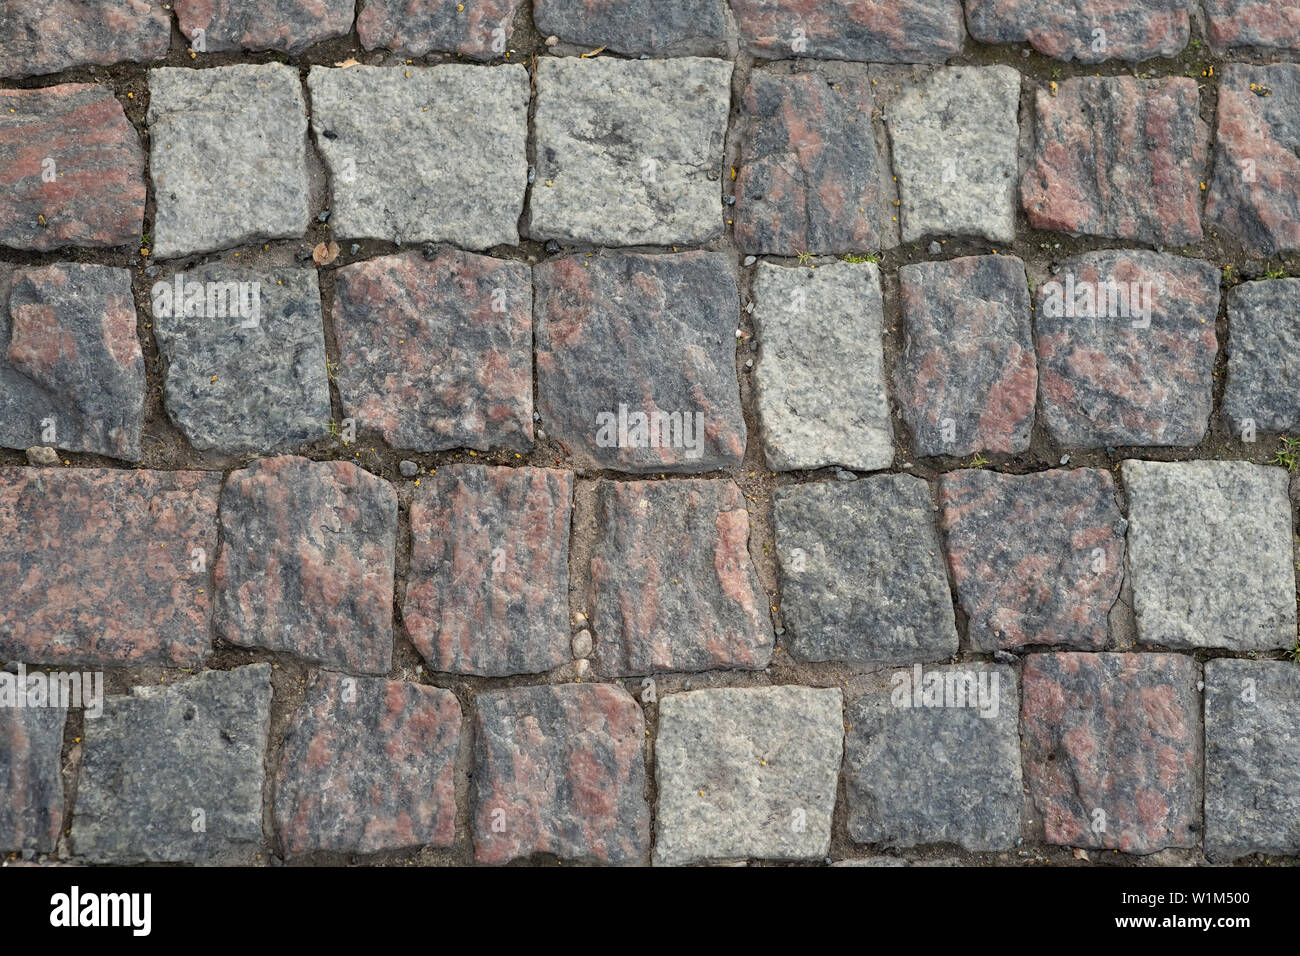 description: Stone pavement texture, granite cobblestoned pavement background, cobbled stone road regular shapes, abstract background of old cobblesto Stock Photo